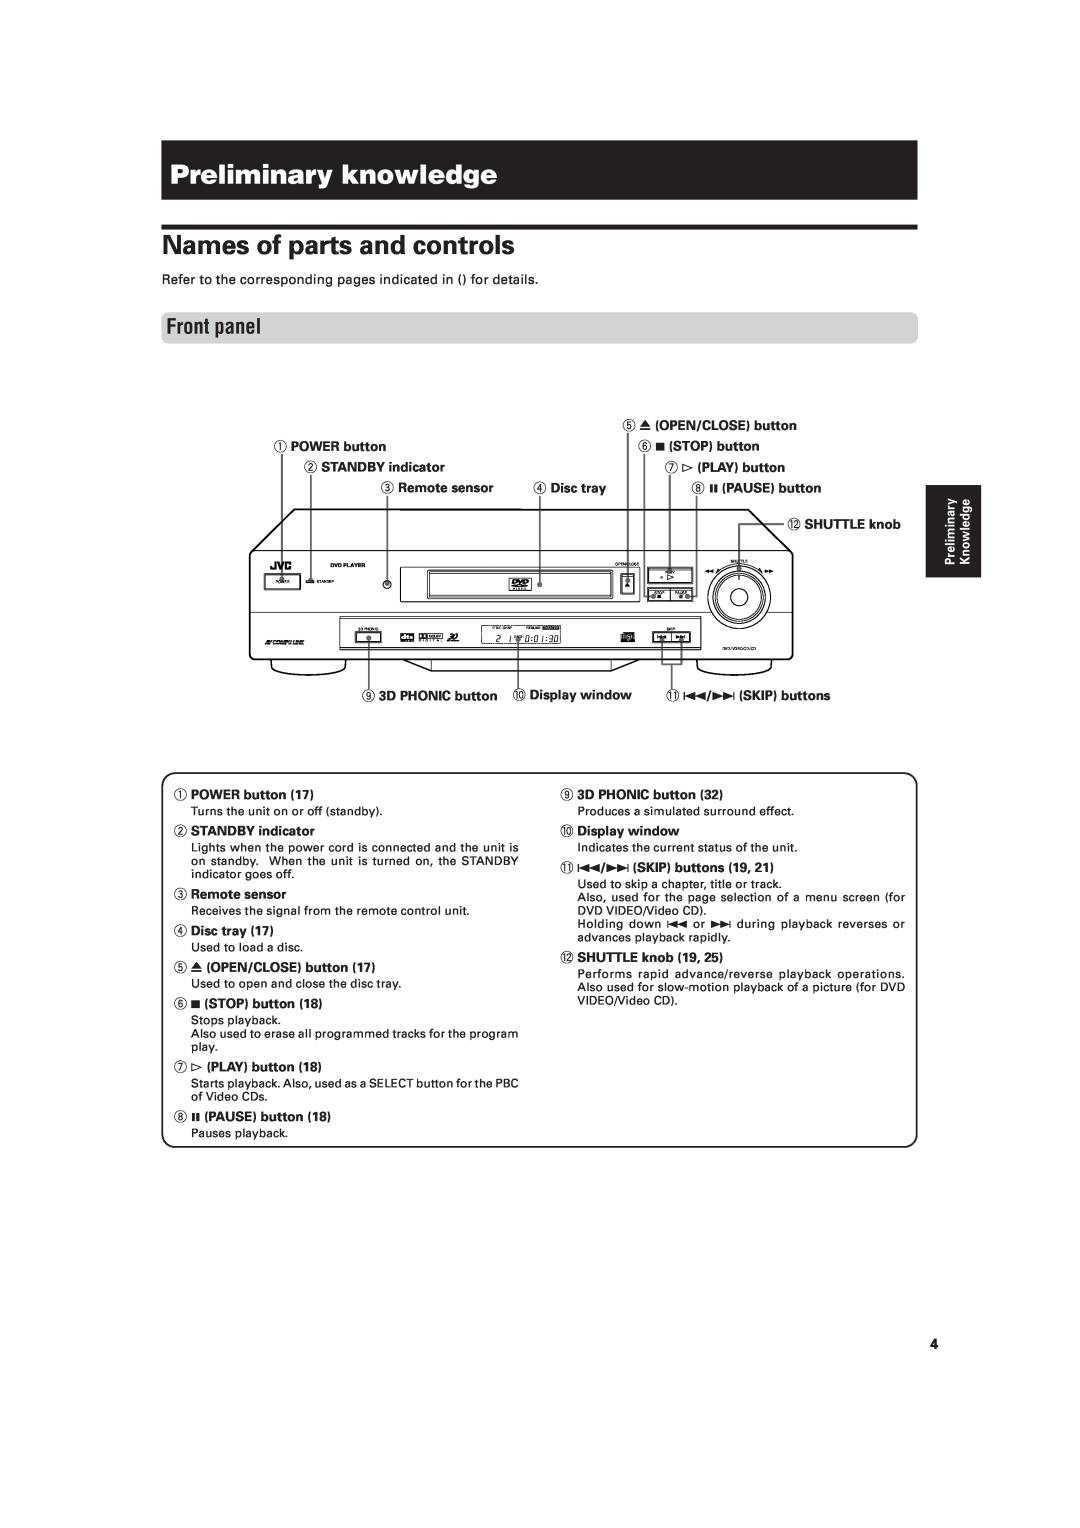 JVC XV-521BK manual Preliminary knowledge, Names of parts and controls, Front panel 